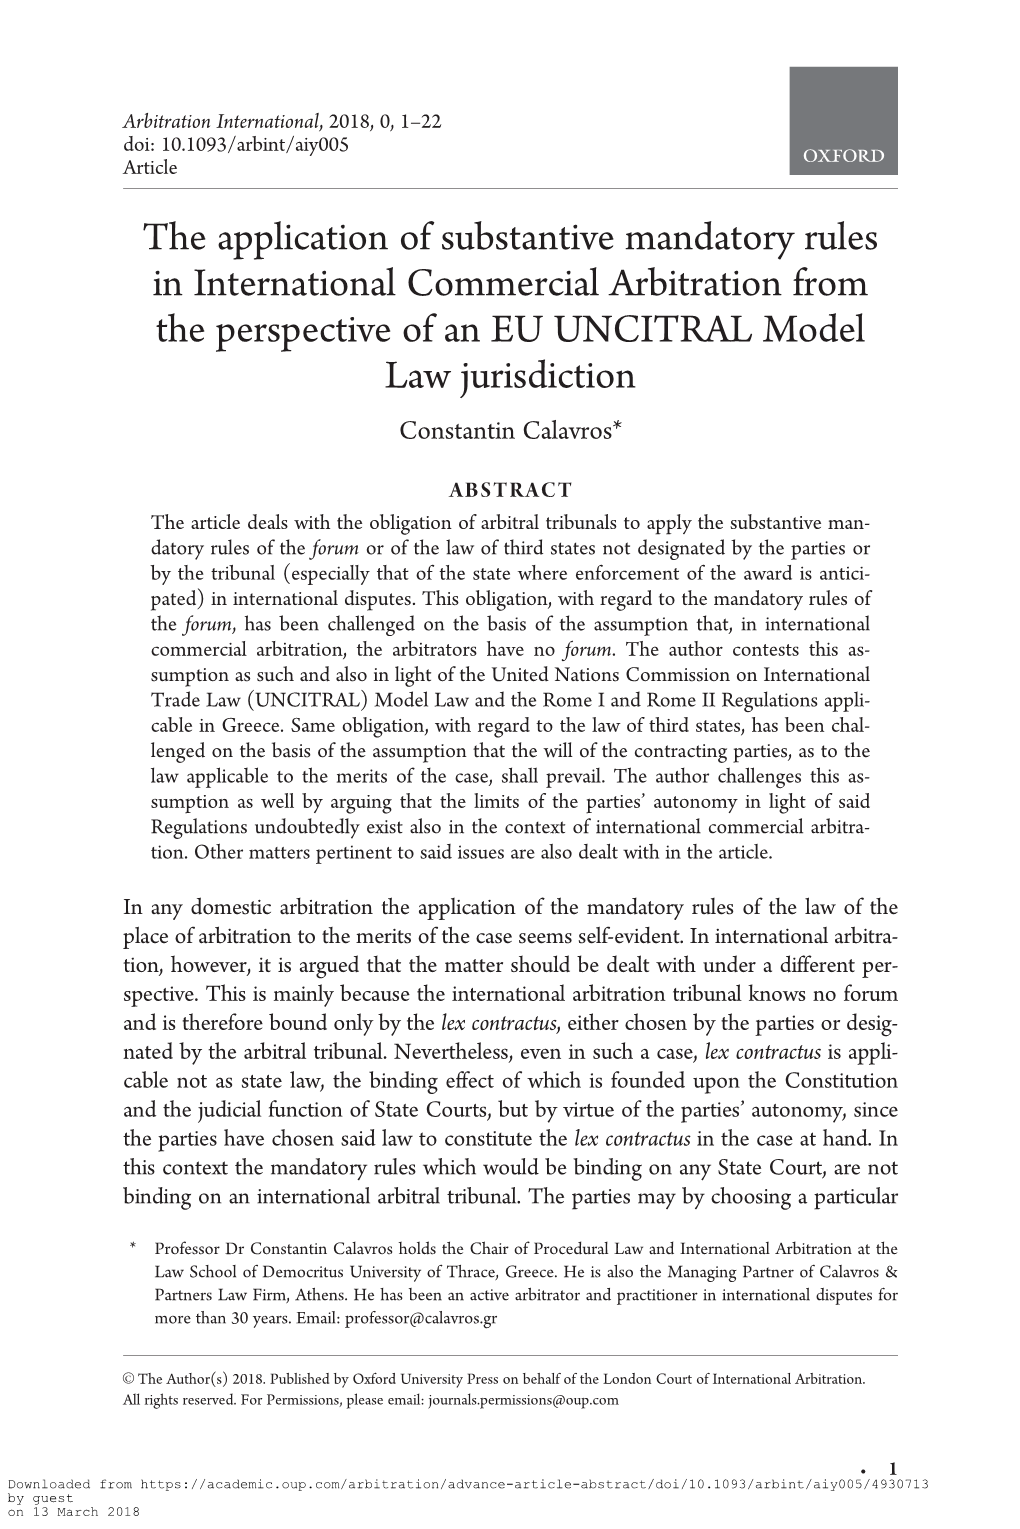 The Application of Substantive Mandatory Rules in International